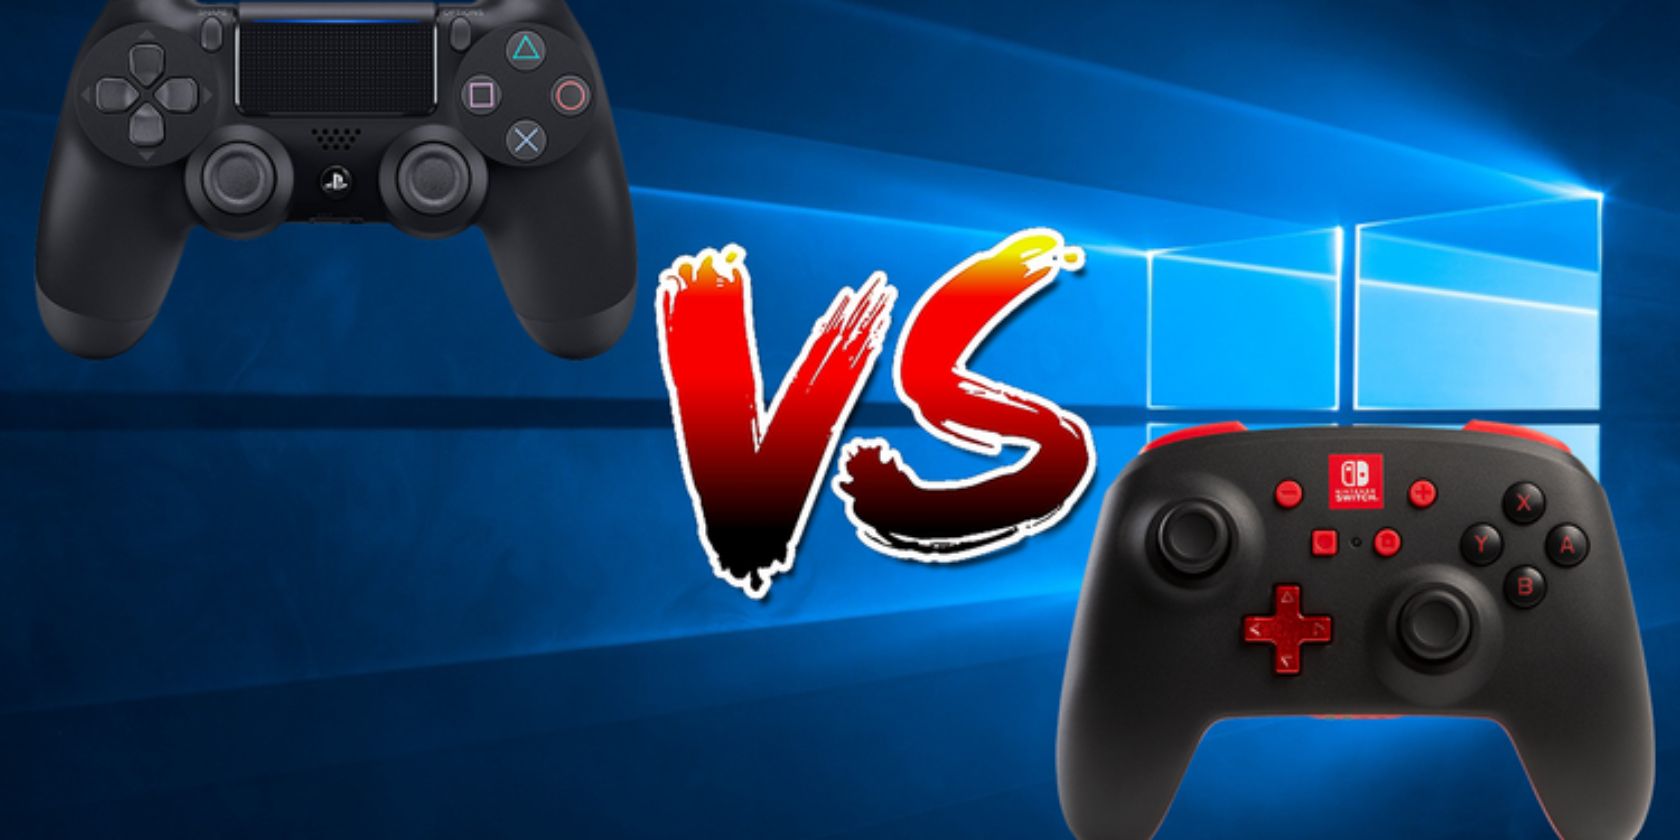 DualShock 4 vs. Pro Controller: Which Is Best For PC Gaming?